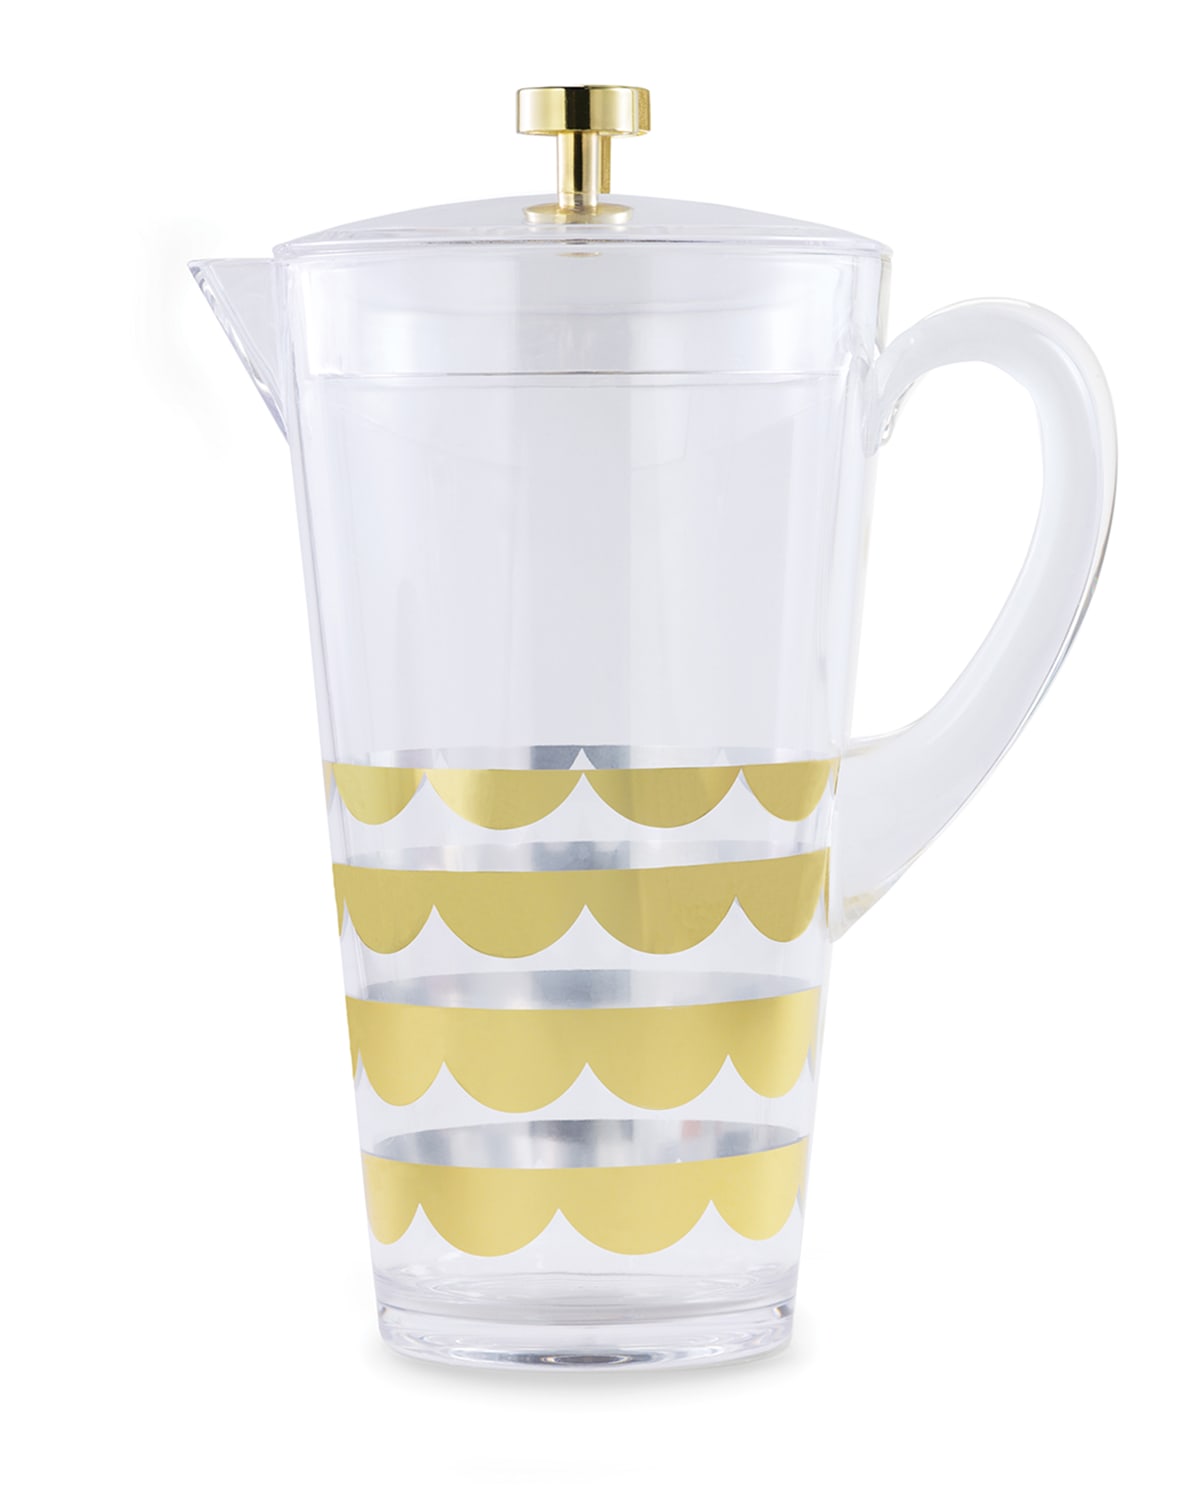 Image kate spade new york gold scallop acrylic pitcher